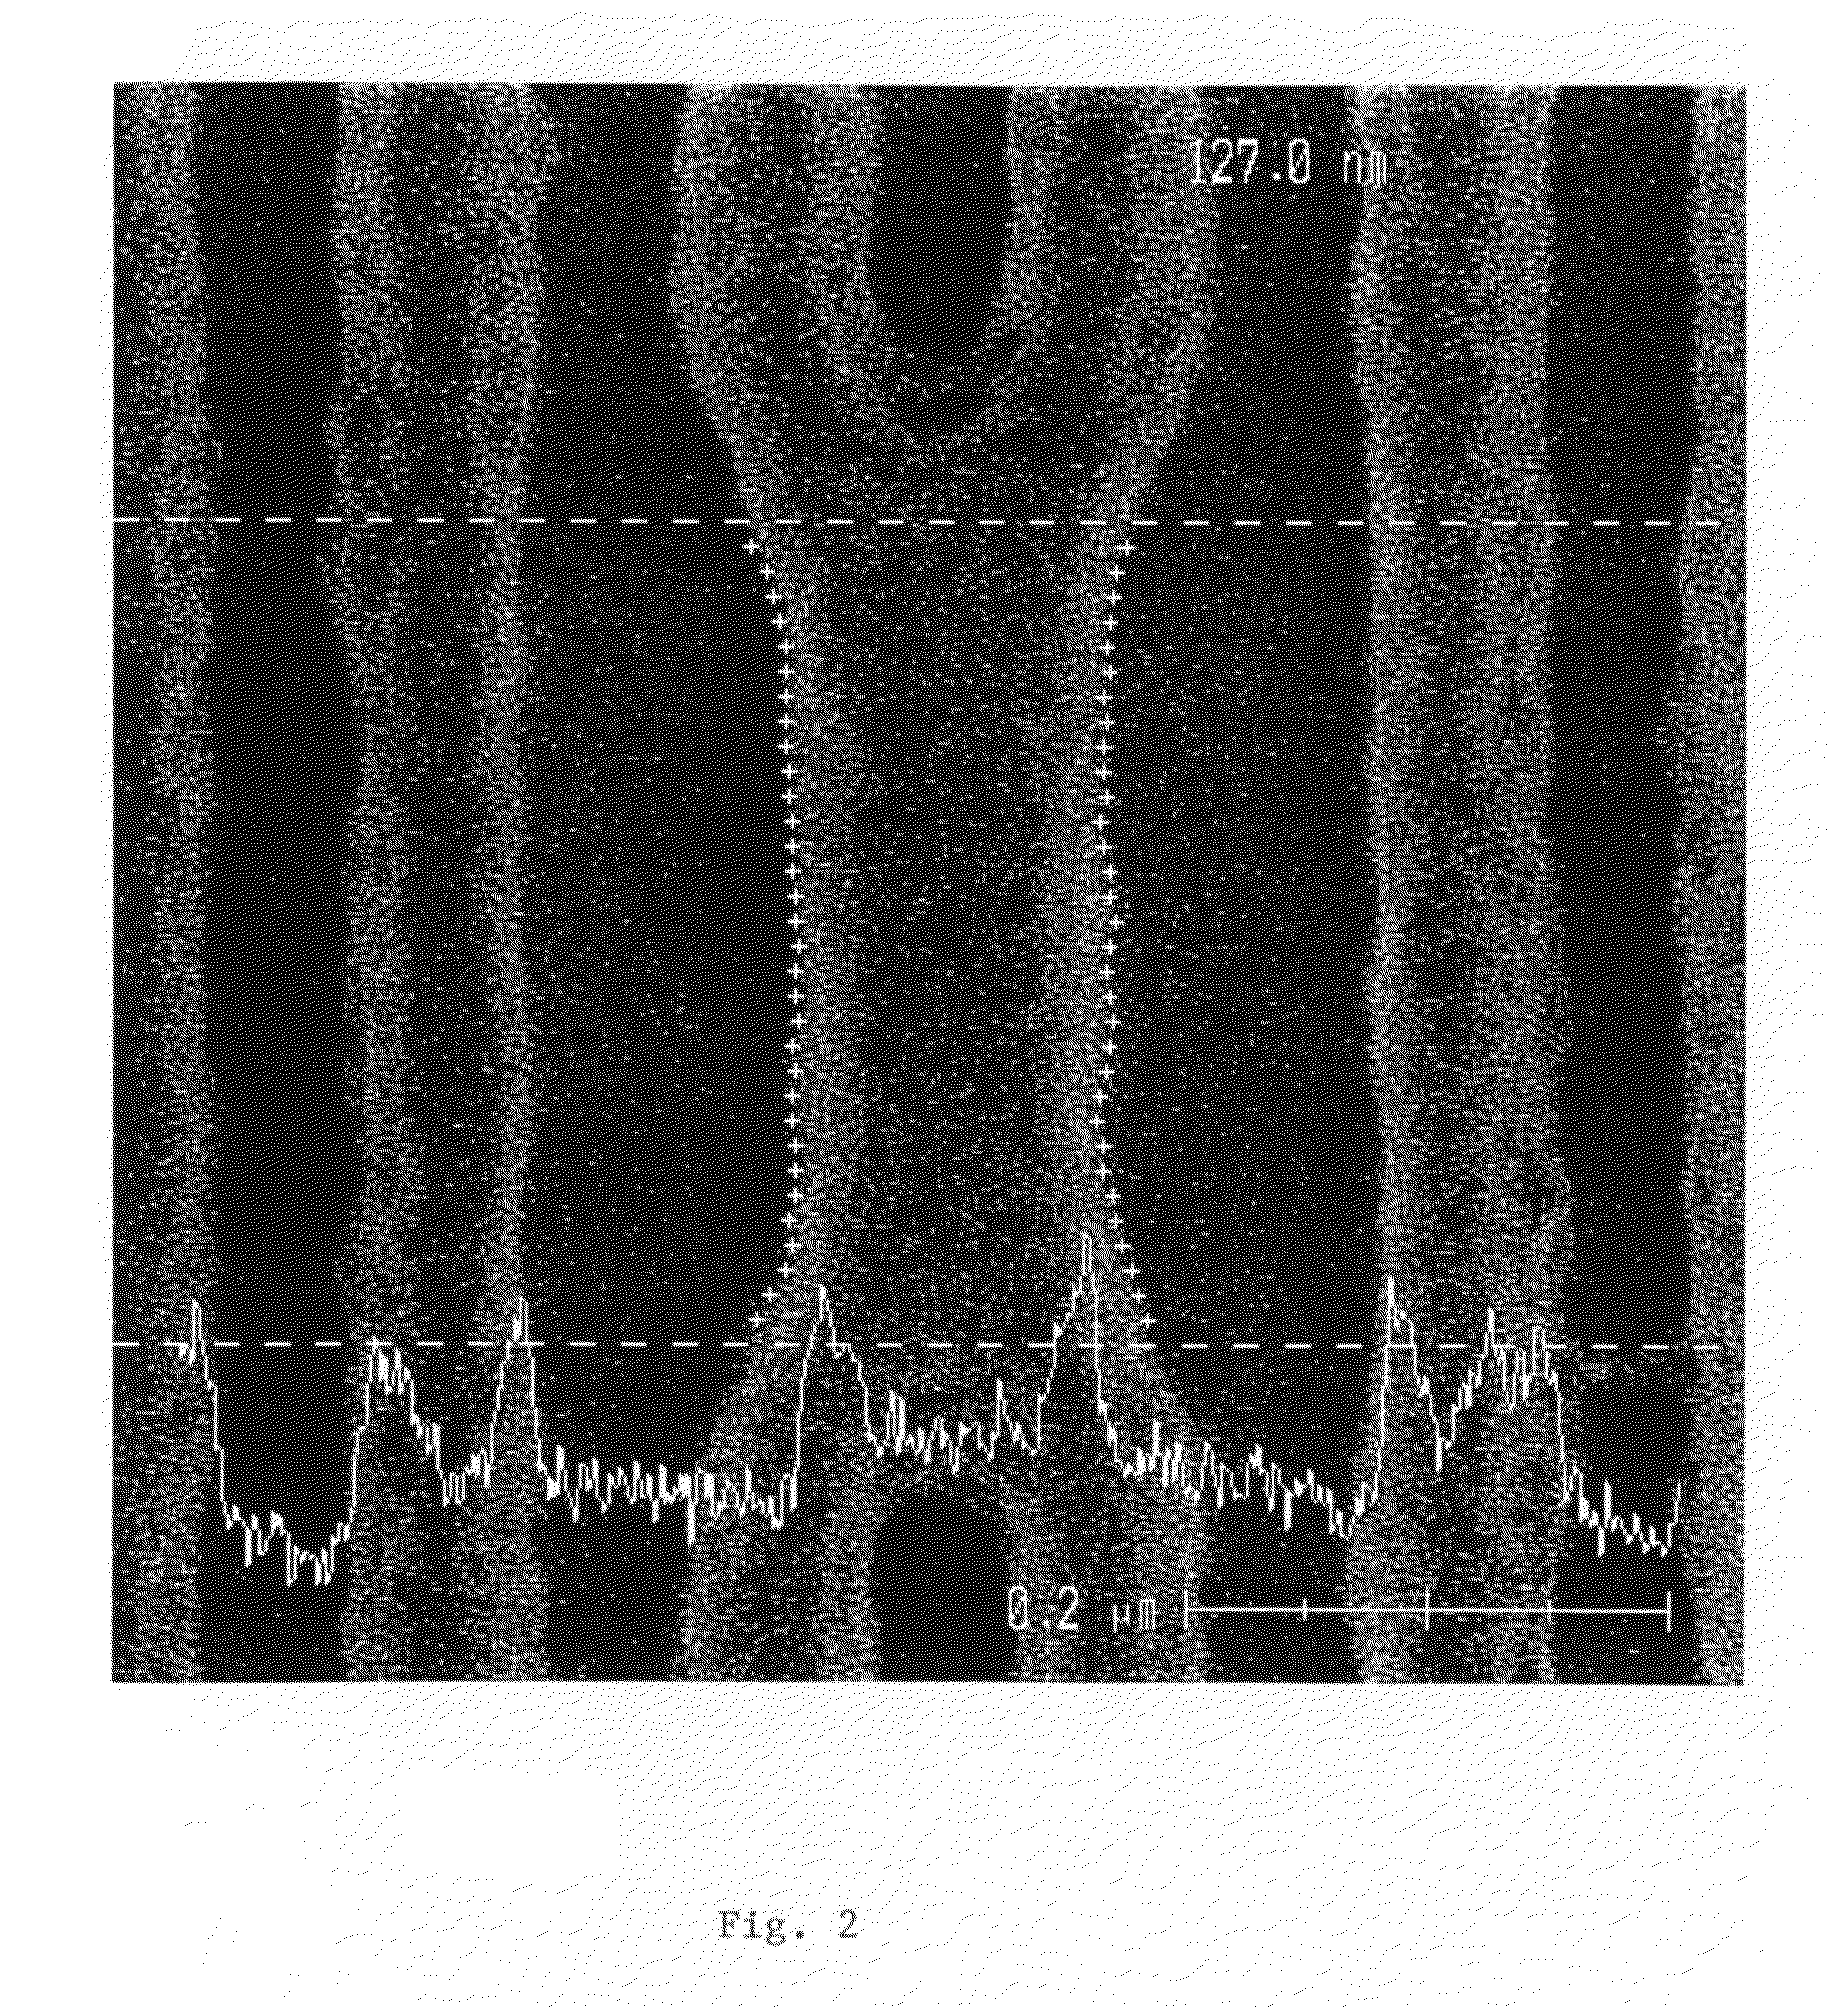 Semiconductor device for preventing voids in the contact region and method of forming the same